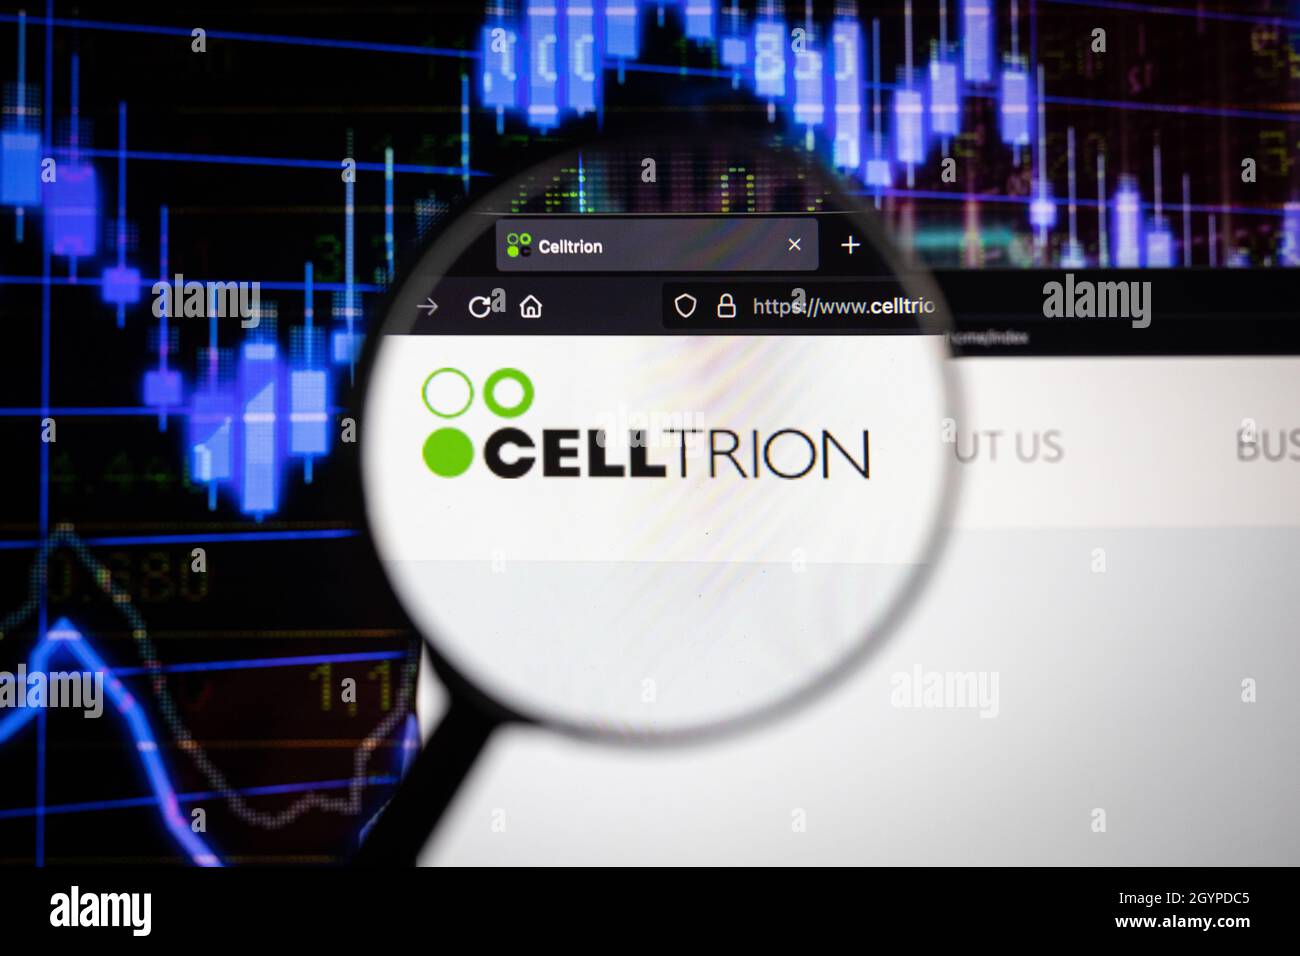 CellTrion company logo on a website with blurry stock market developments in the background, seen on a computer screen through a magnifying glass Stock Photo